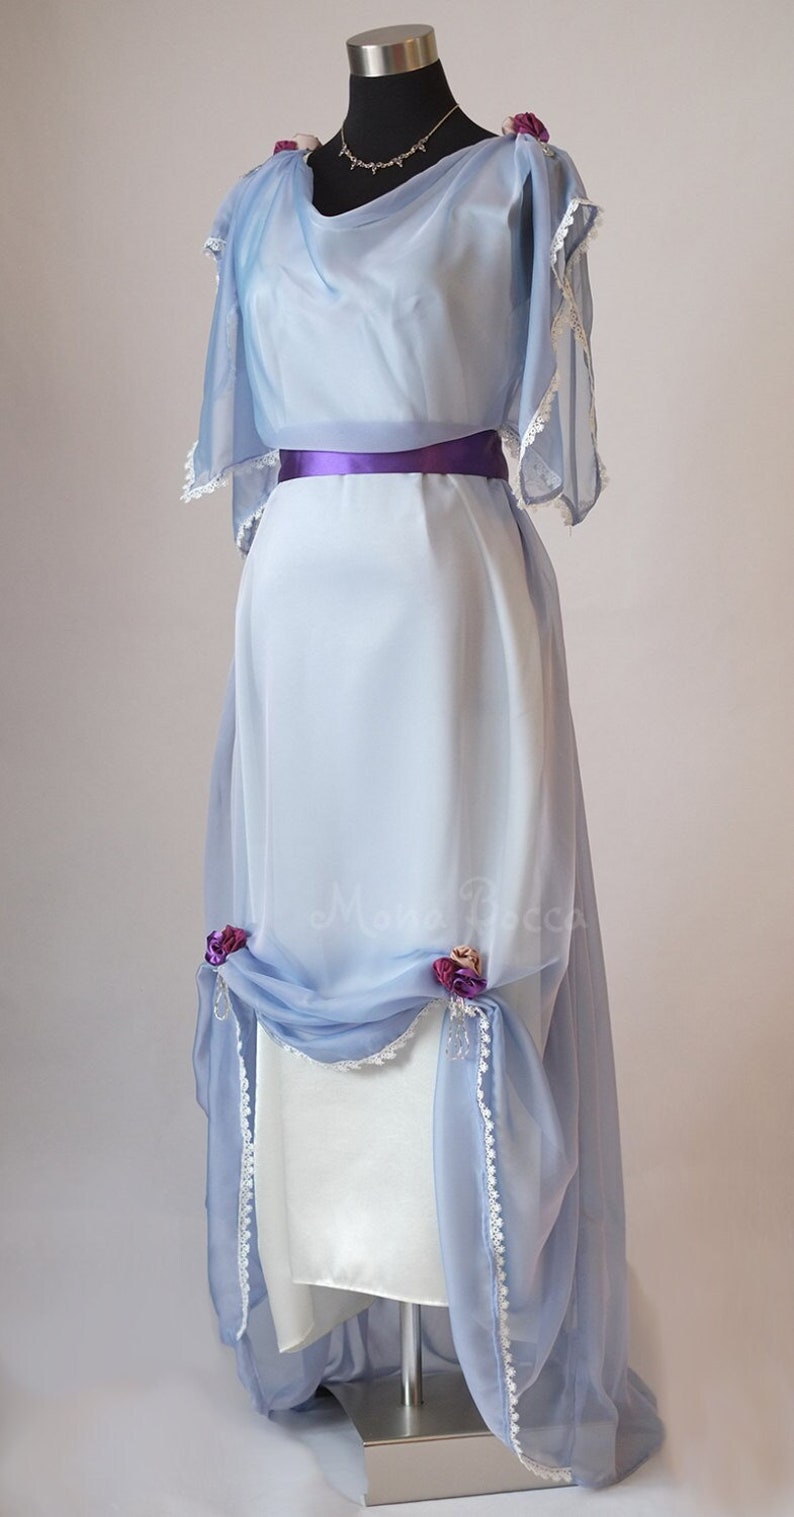 Edwardian Evening Dress History | Ballgowns, Dinner Dress     Edwardian light blue evening dress Gilded Age Downton Abbey inspired Titanic styled dress Made in England  AT vintagedancer.com